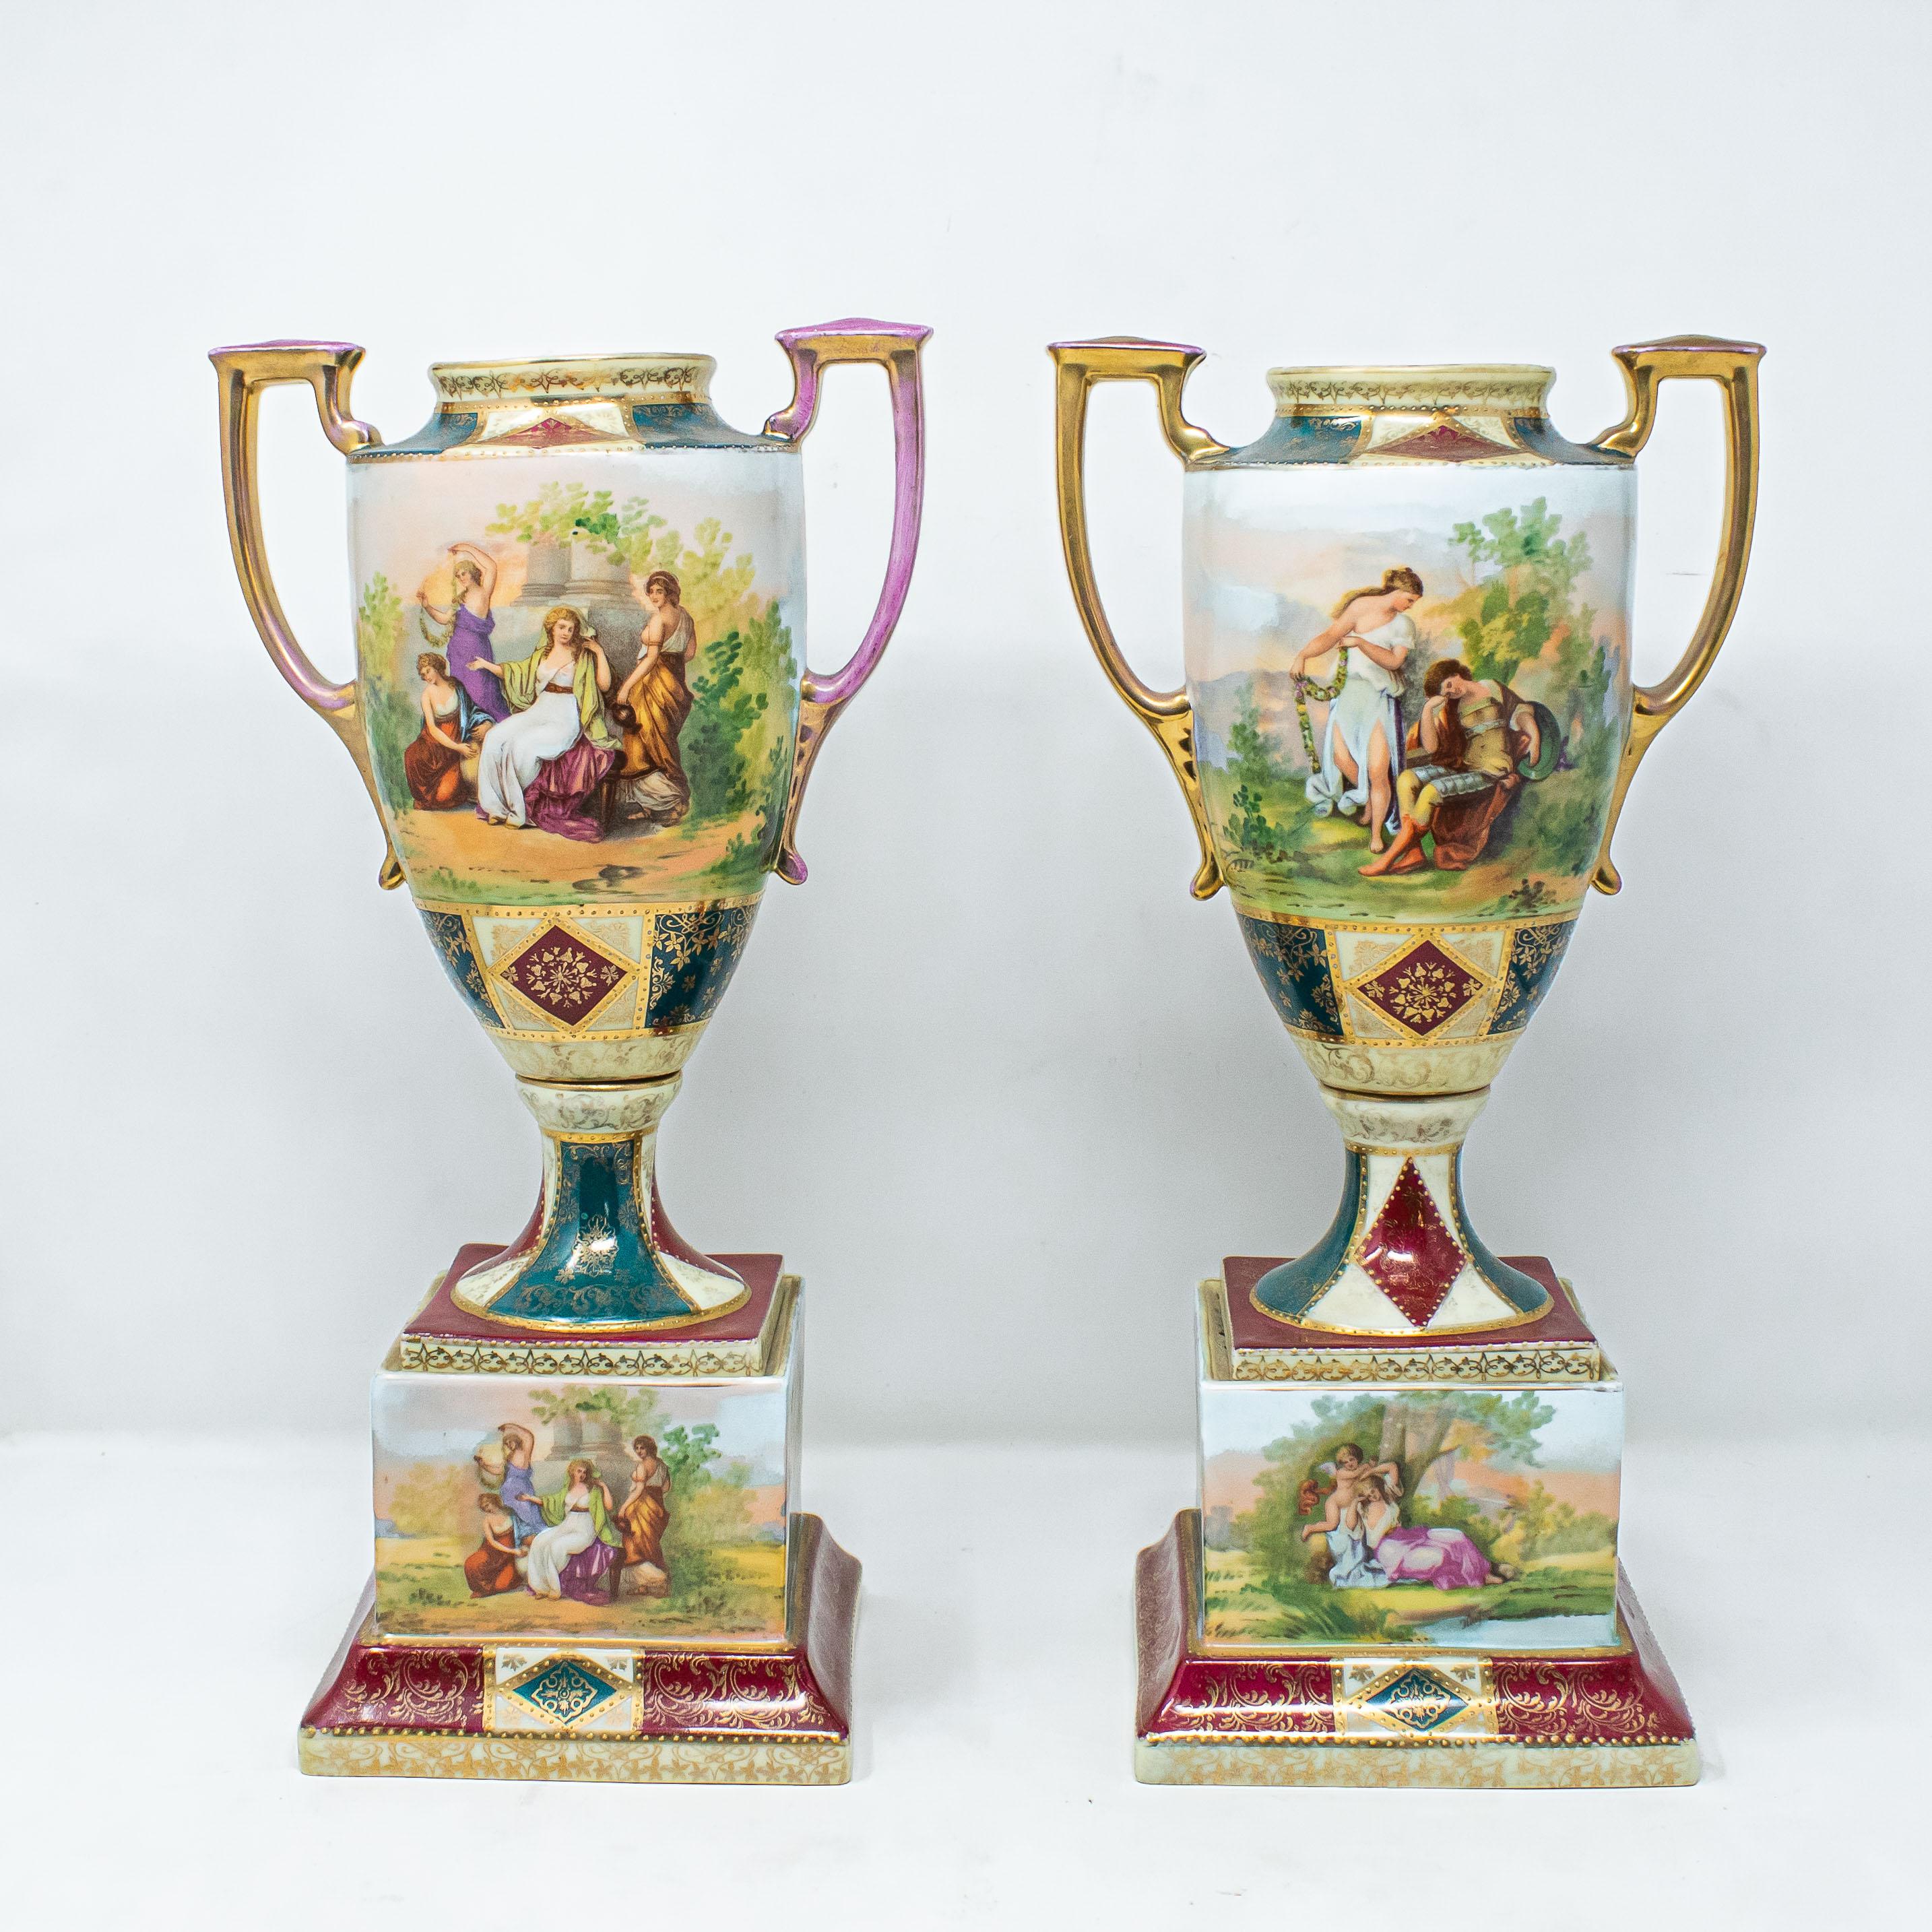 19th century, Bloch workshop

Pair of vases

(2) Porcelain, cm H. 36

The two porcelain vases, in the shape of an amphora, with handles, are to be associated with the Bloch workshop, active in the town of Eichwald in Austria: the two vases,